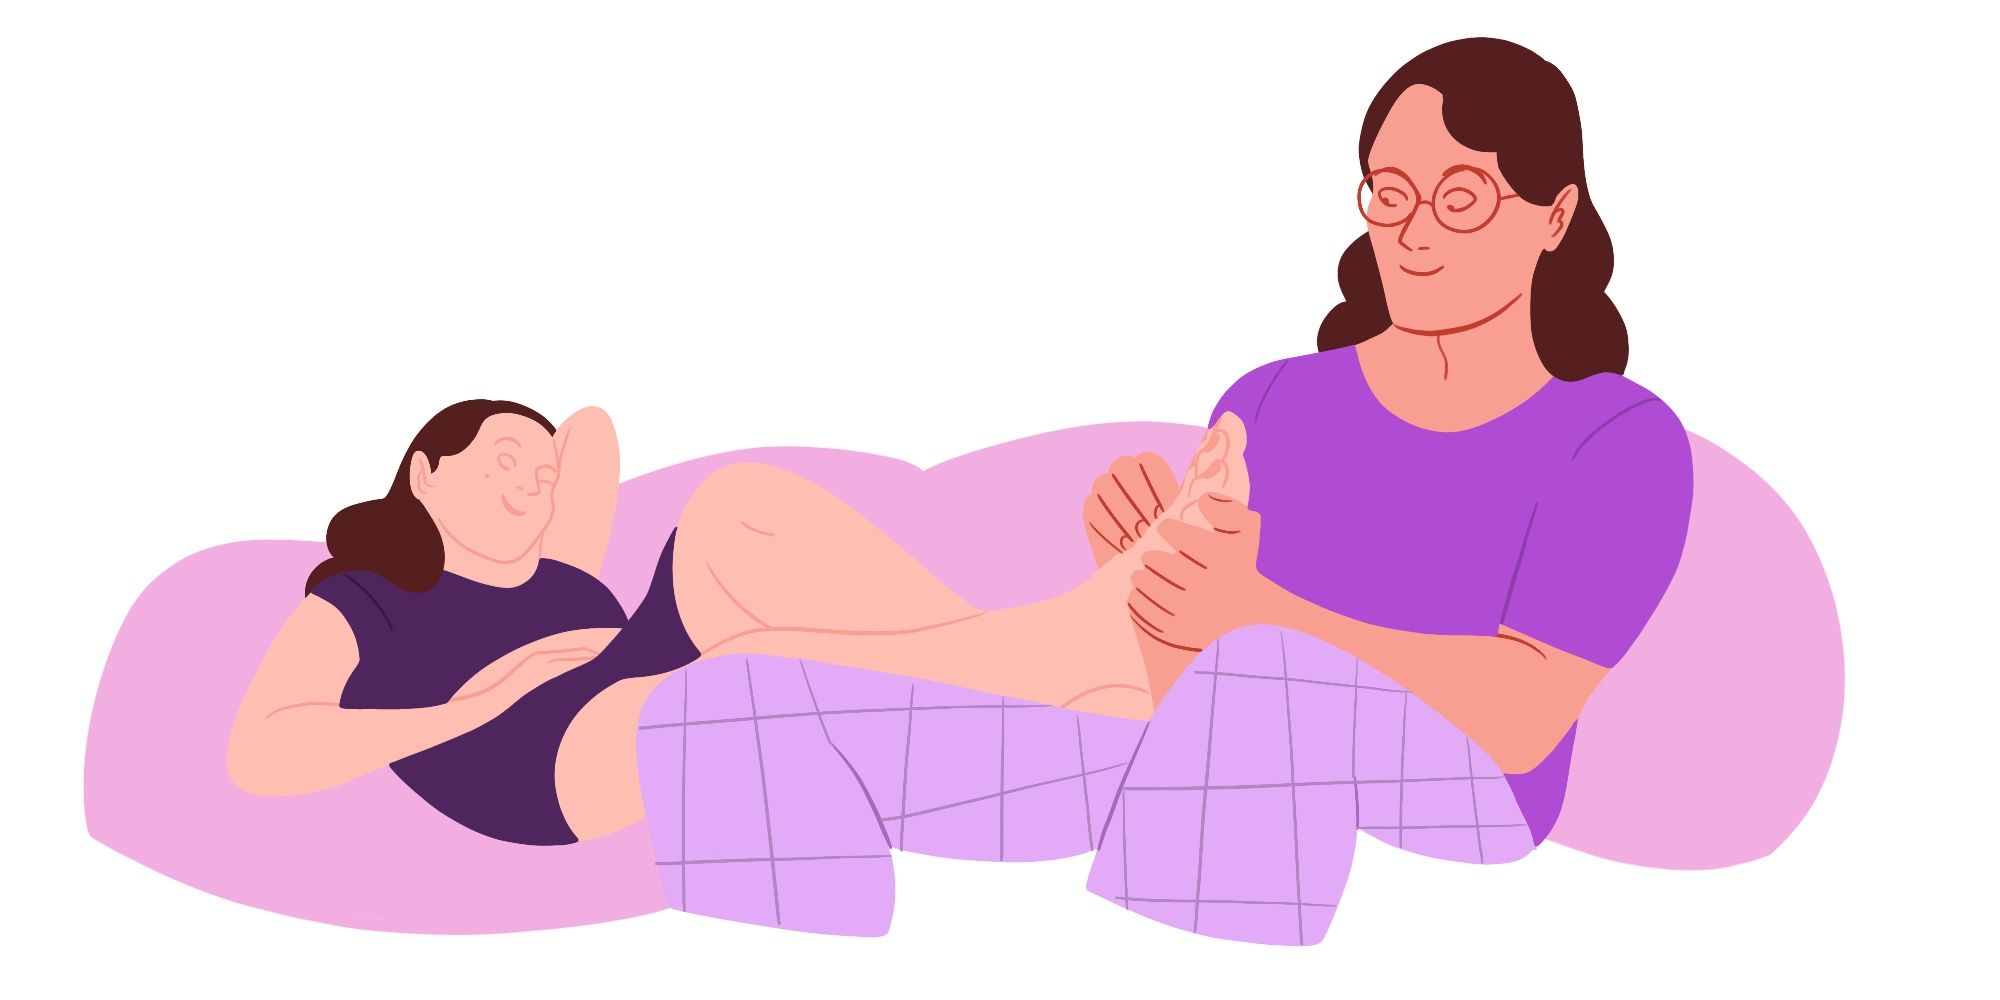 12 Cuddling Positions That Are Just As Intimate As Actual Sex